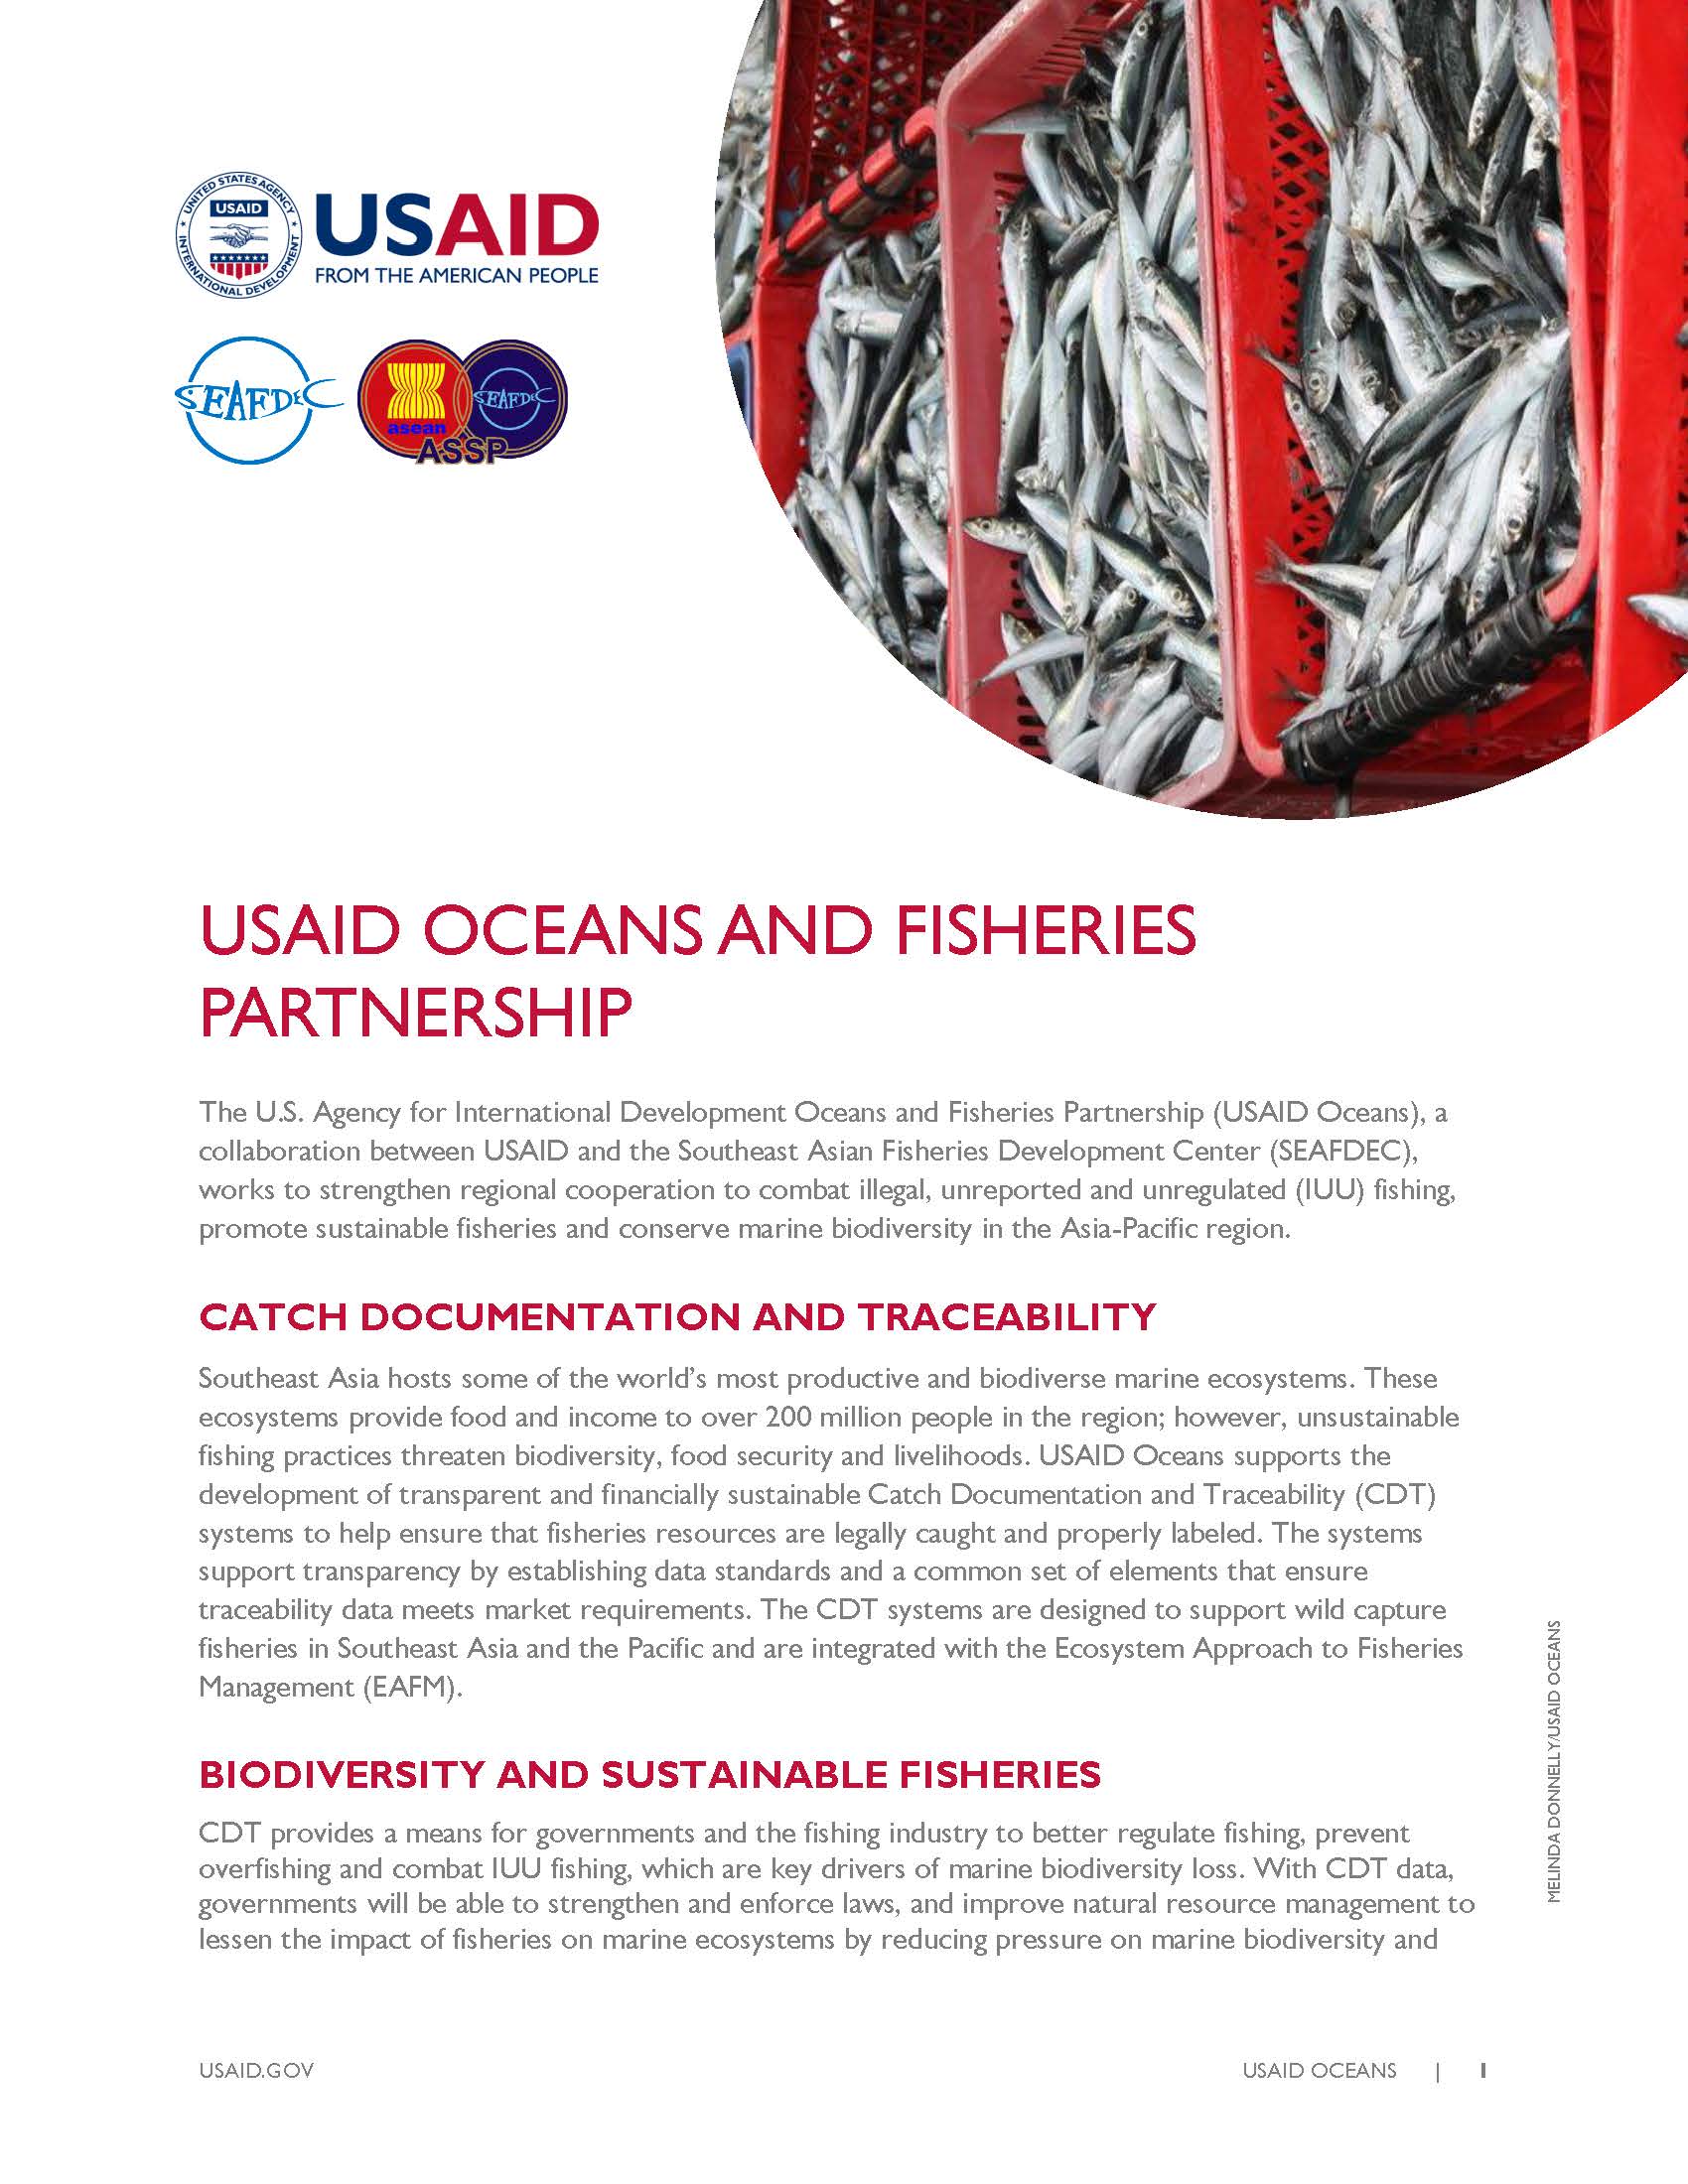 USAID OCEANS AND FISHERIES PARTNERSHIP